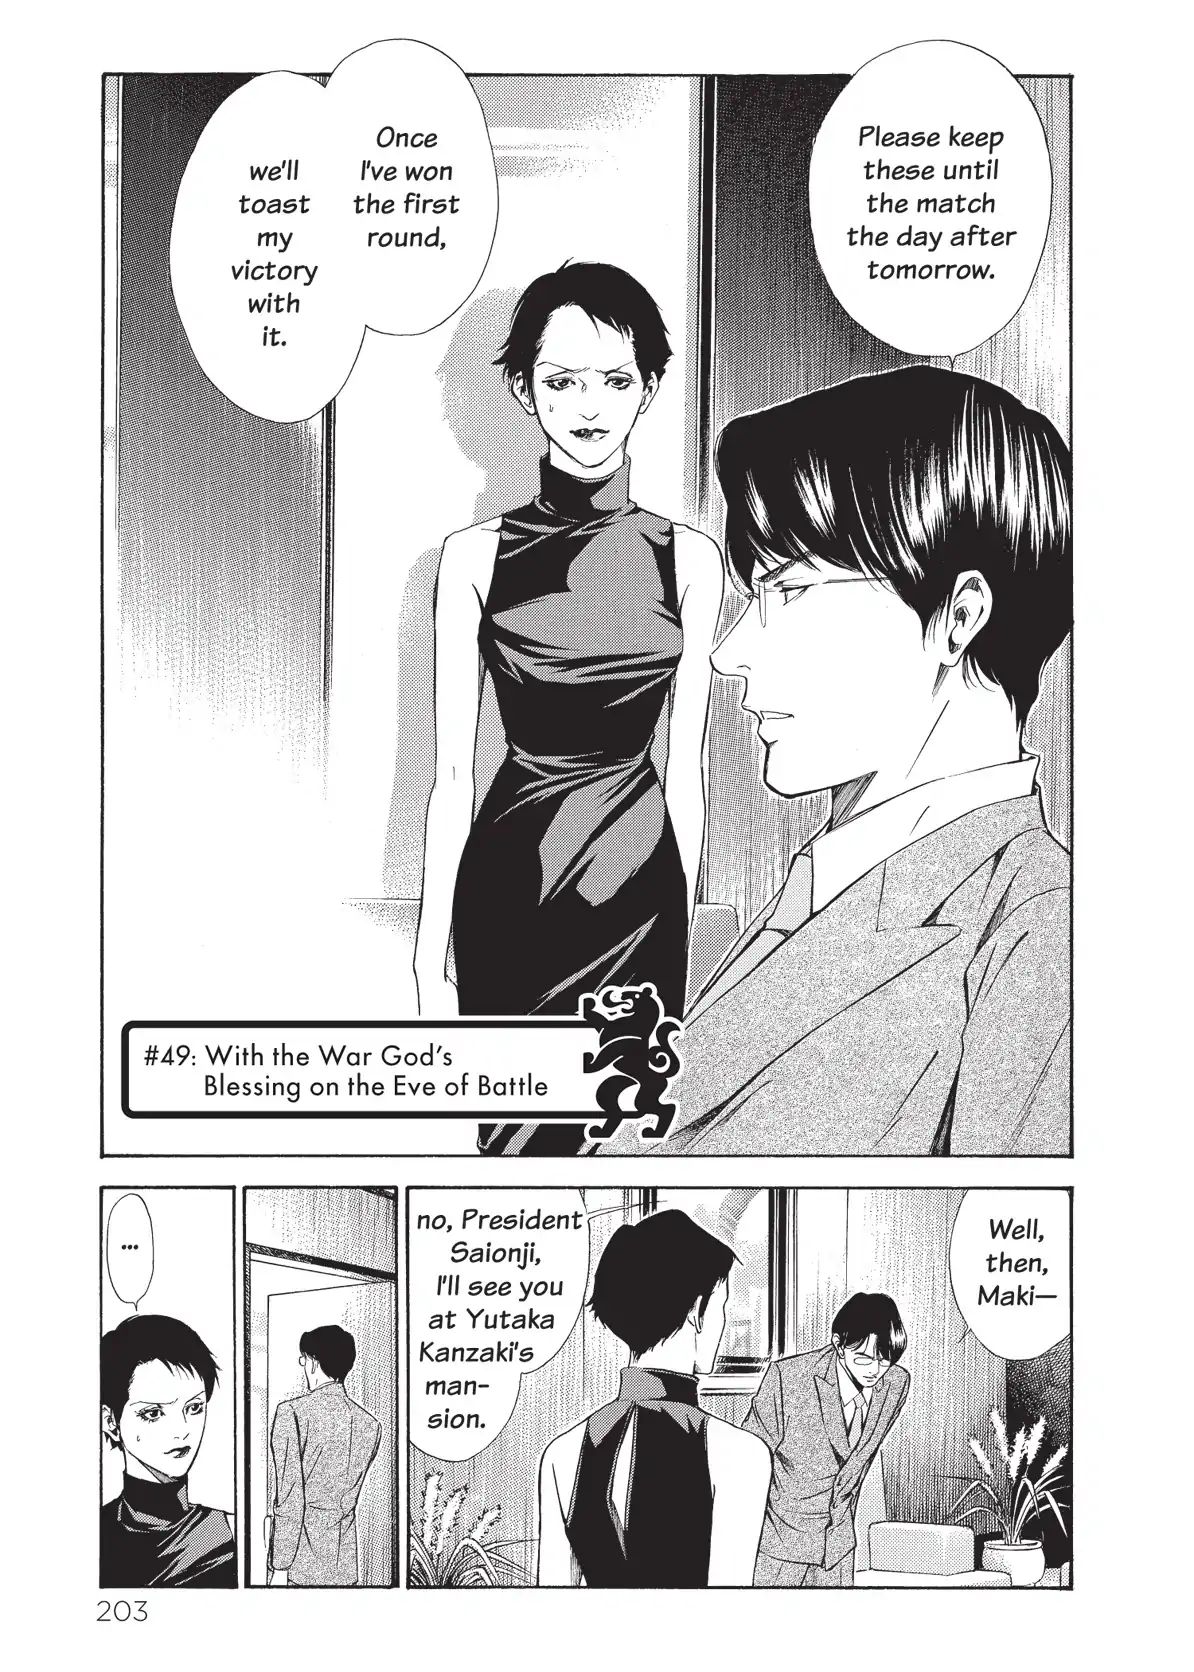 Kami No Shizuku Vol.3 Chapter 49: With The War God's Blessing On The Eve Of Battle - Picture 1